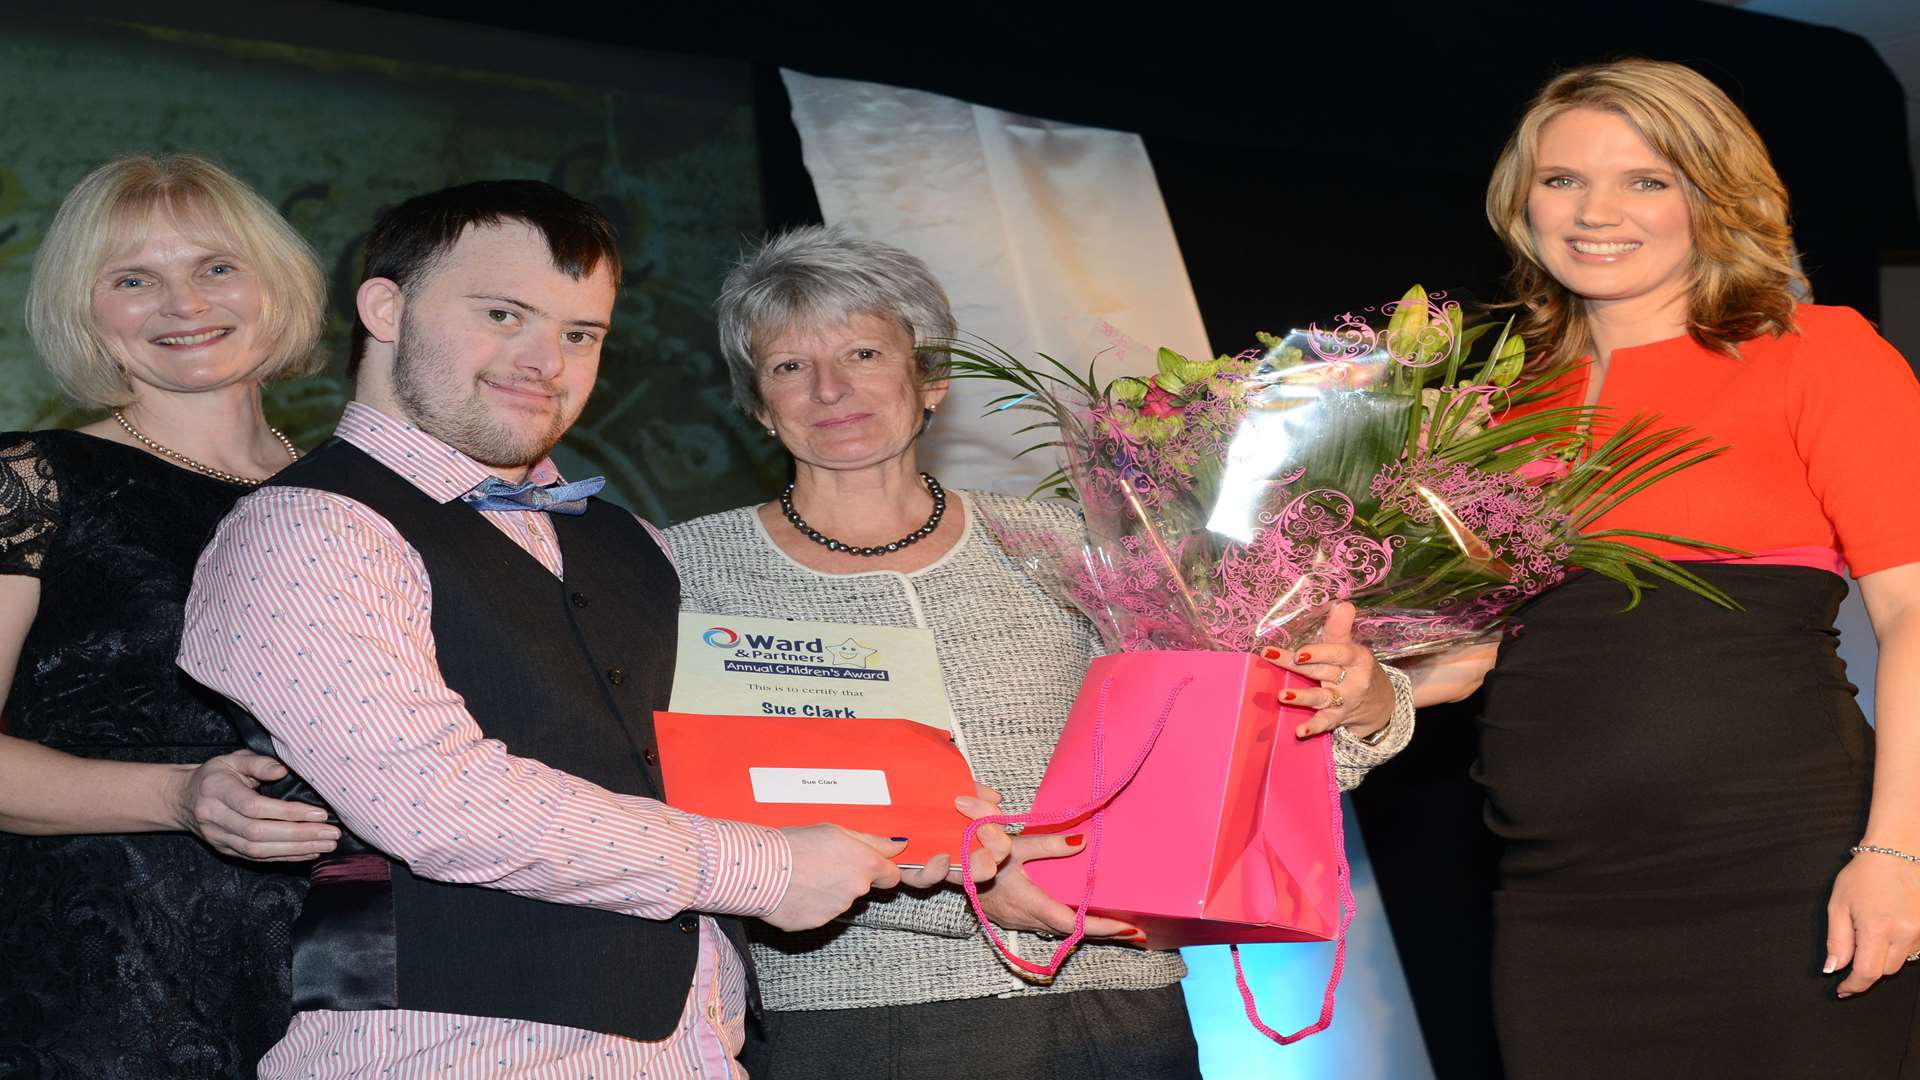 Sue Clark and son Jamie, who won Outstanding Contribution award presented by Carol Lynch and Charlotte Hawkins